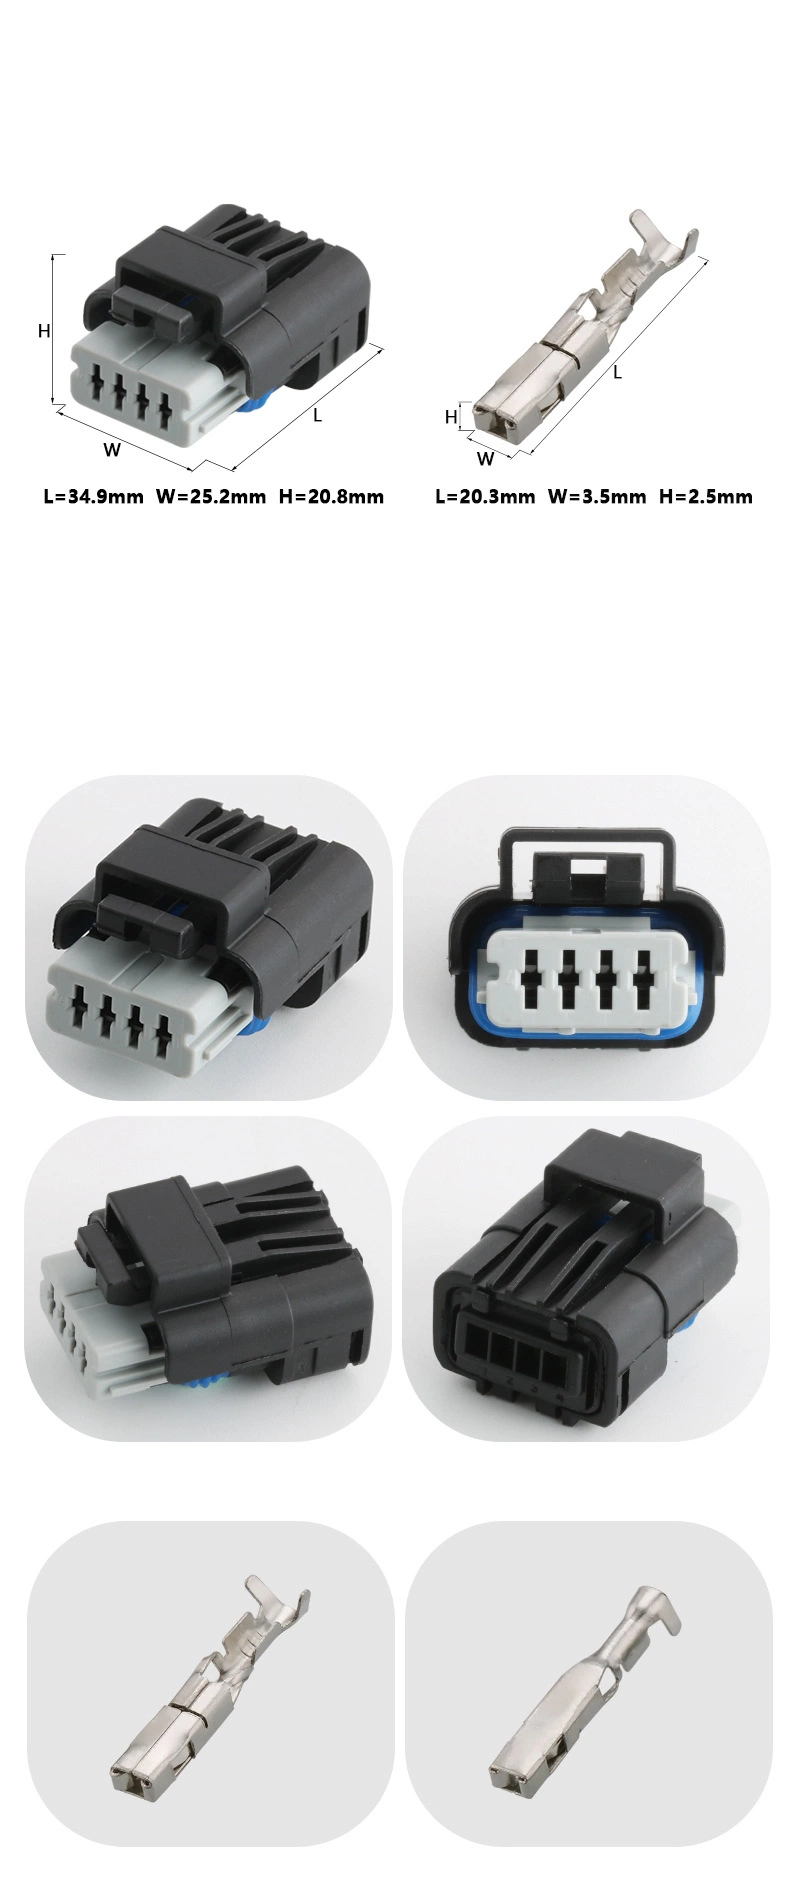 4p Car Connector 211PC042s4021 Is Suitable for Reversing Camera Pressure Sensor Plug Can Be Equipped with Cable Wiring Harness